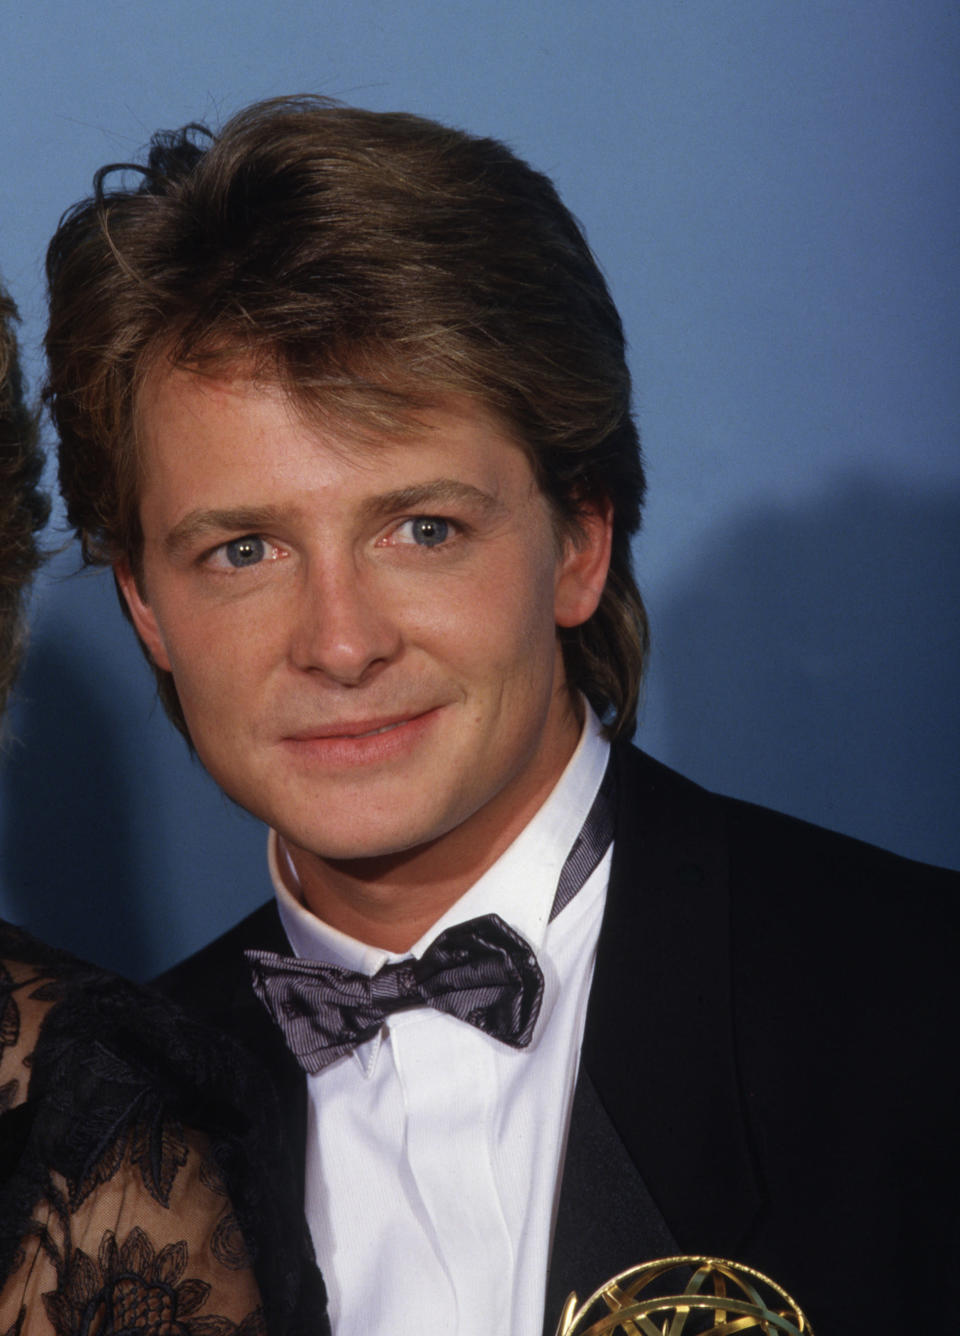 Michael J. Fox is seen backstage at the Emmys on September 20, 1987